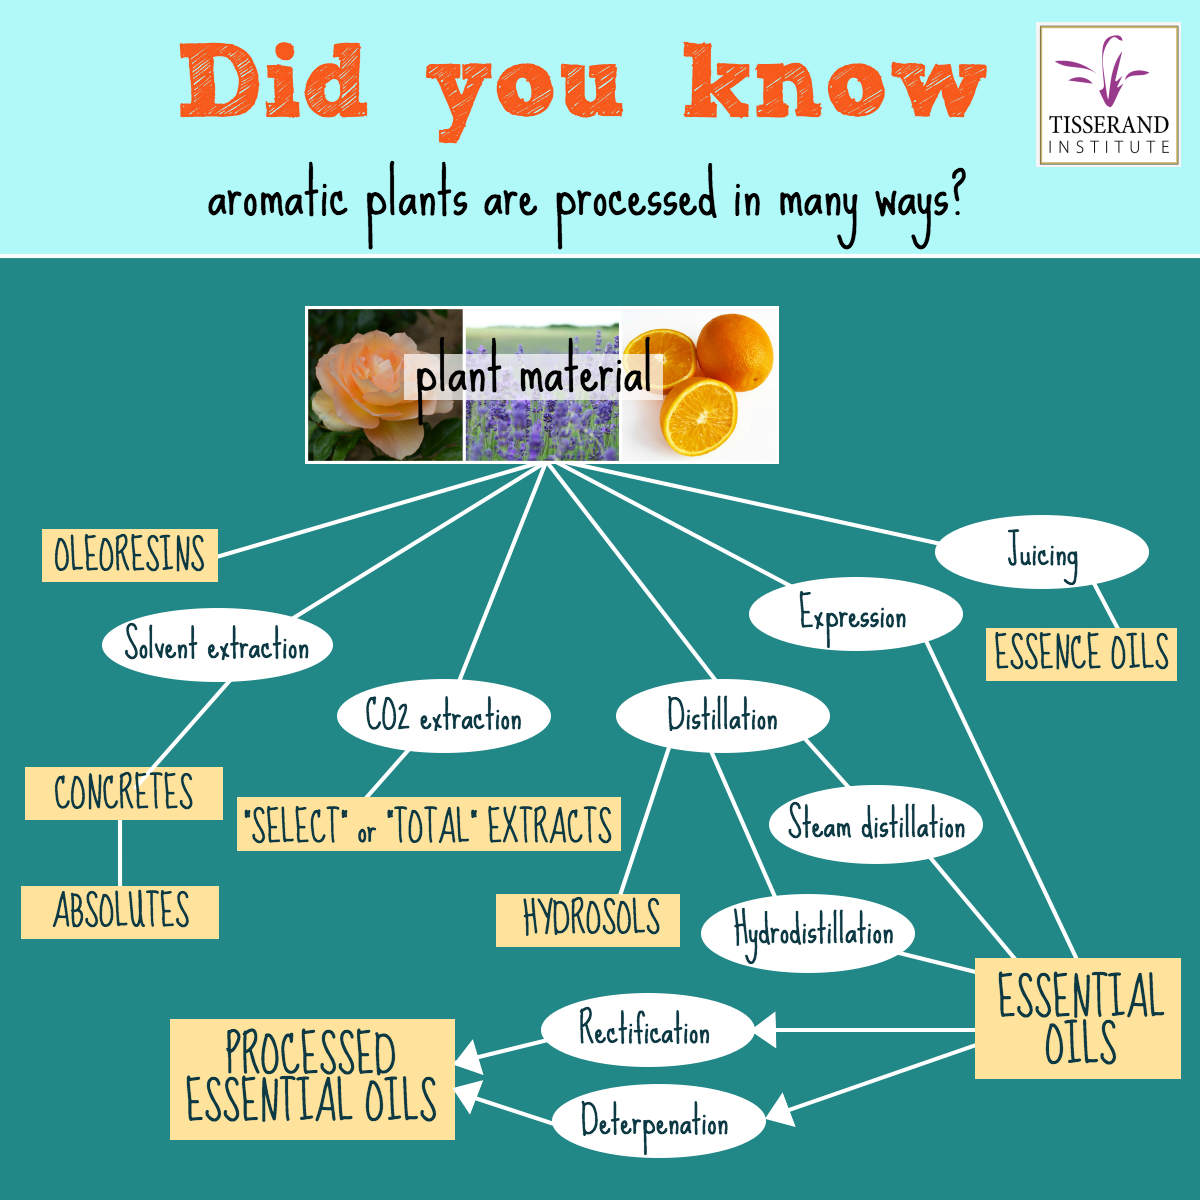 Processing of aromatic plants